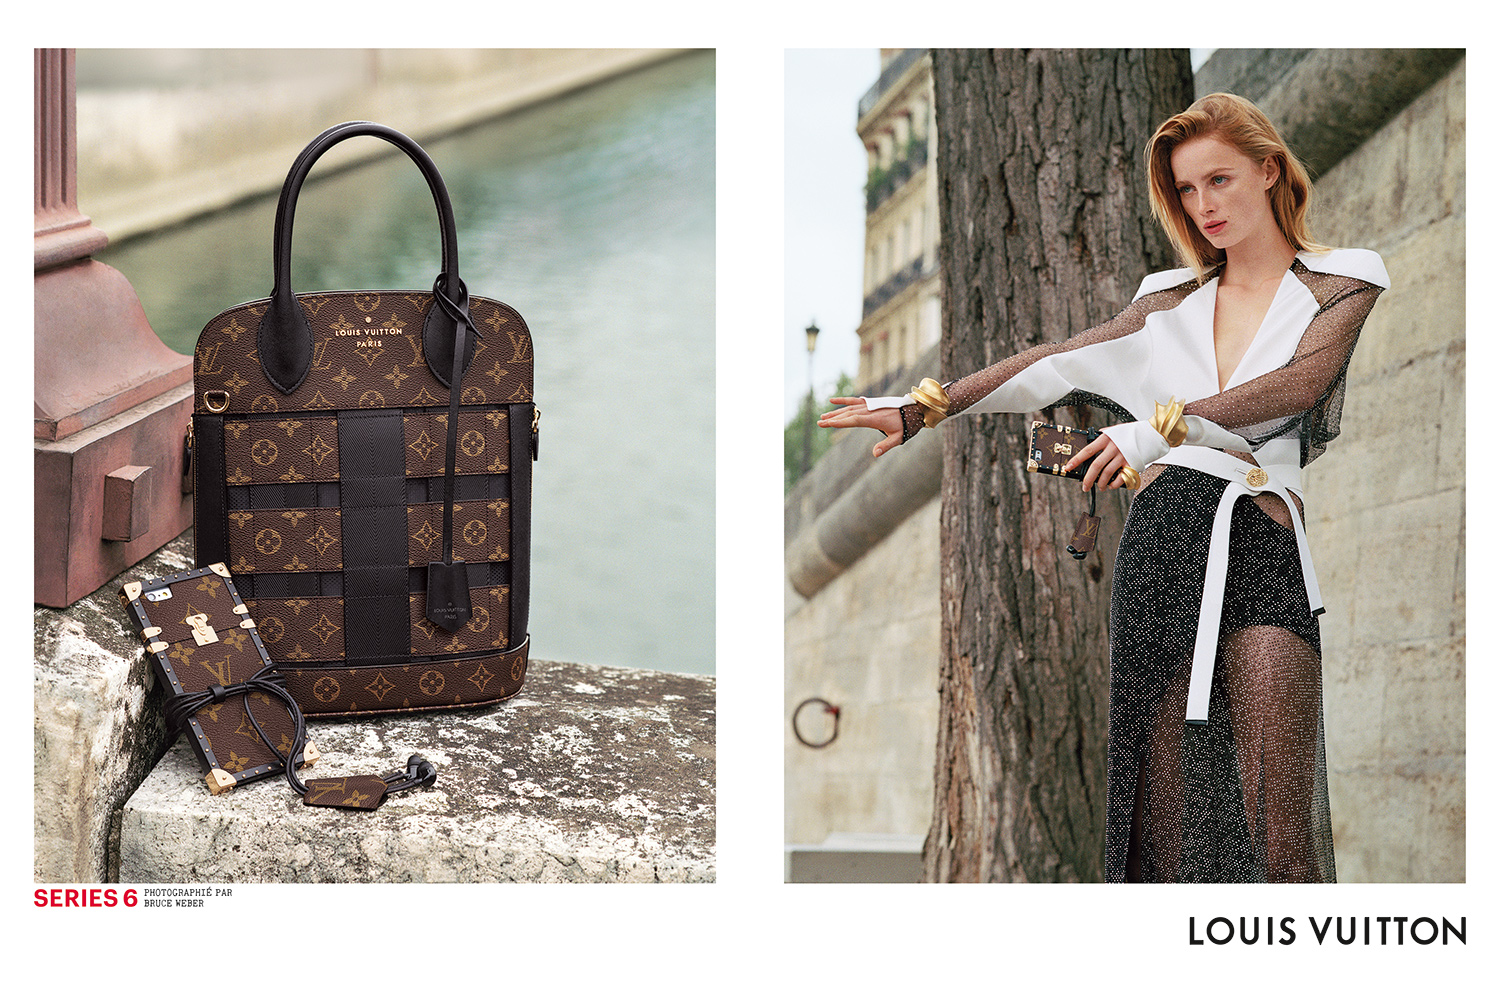 Walking into the Reminiscent Past of Louis Vuitton’s Handbags